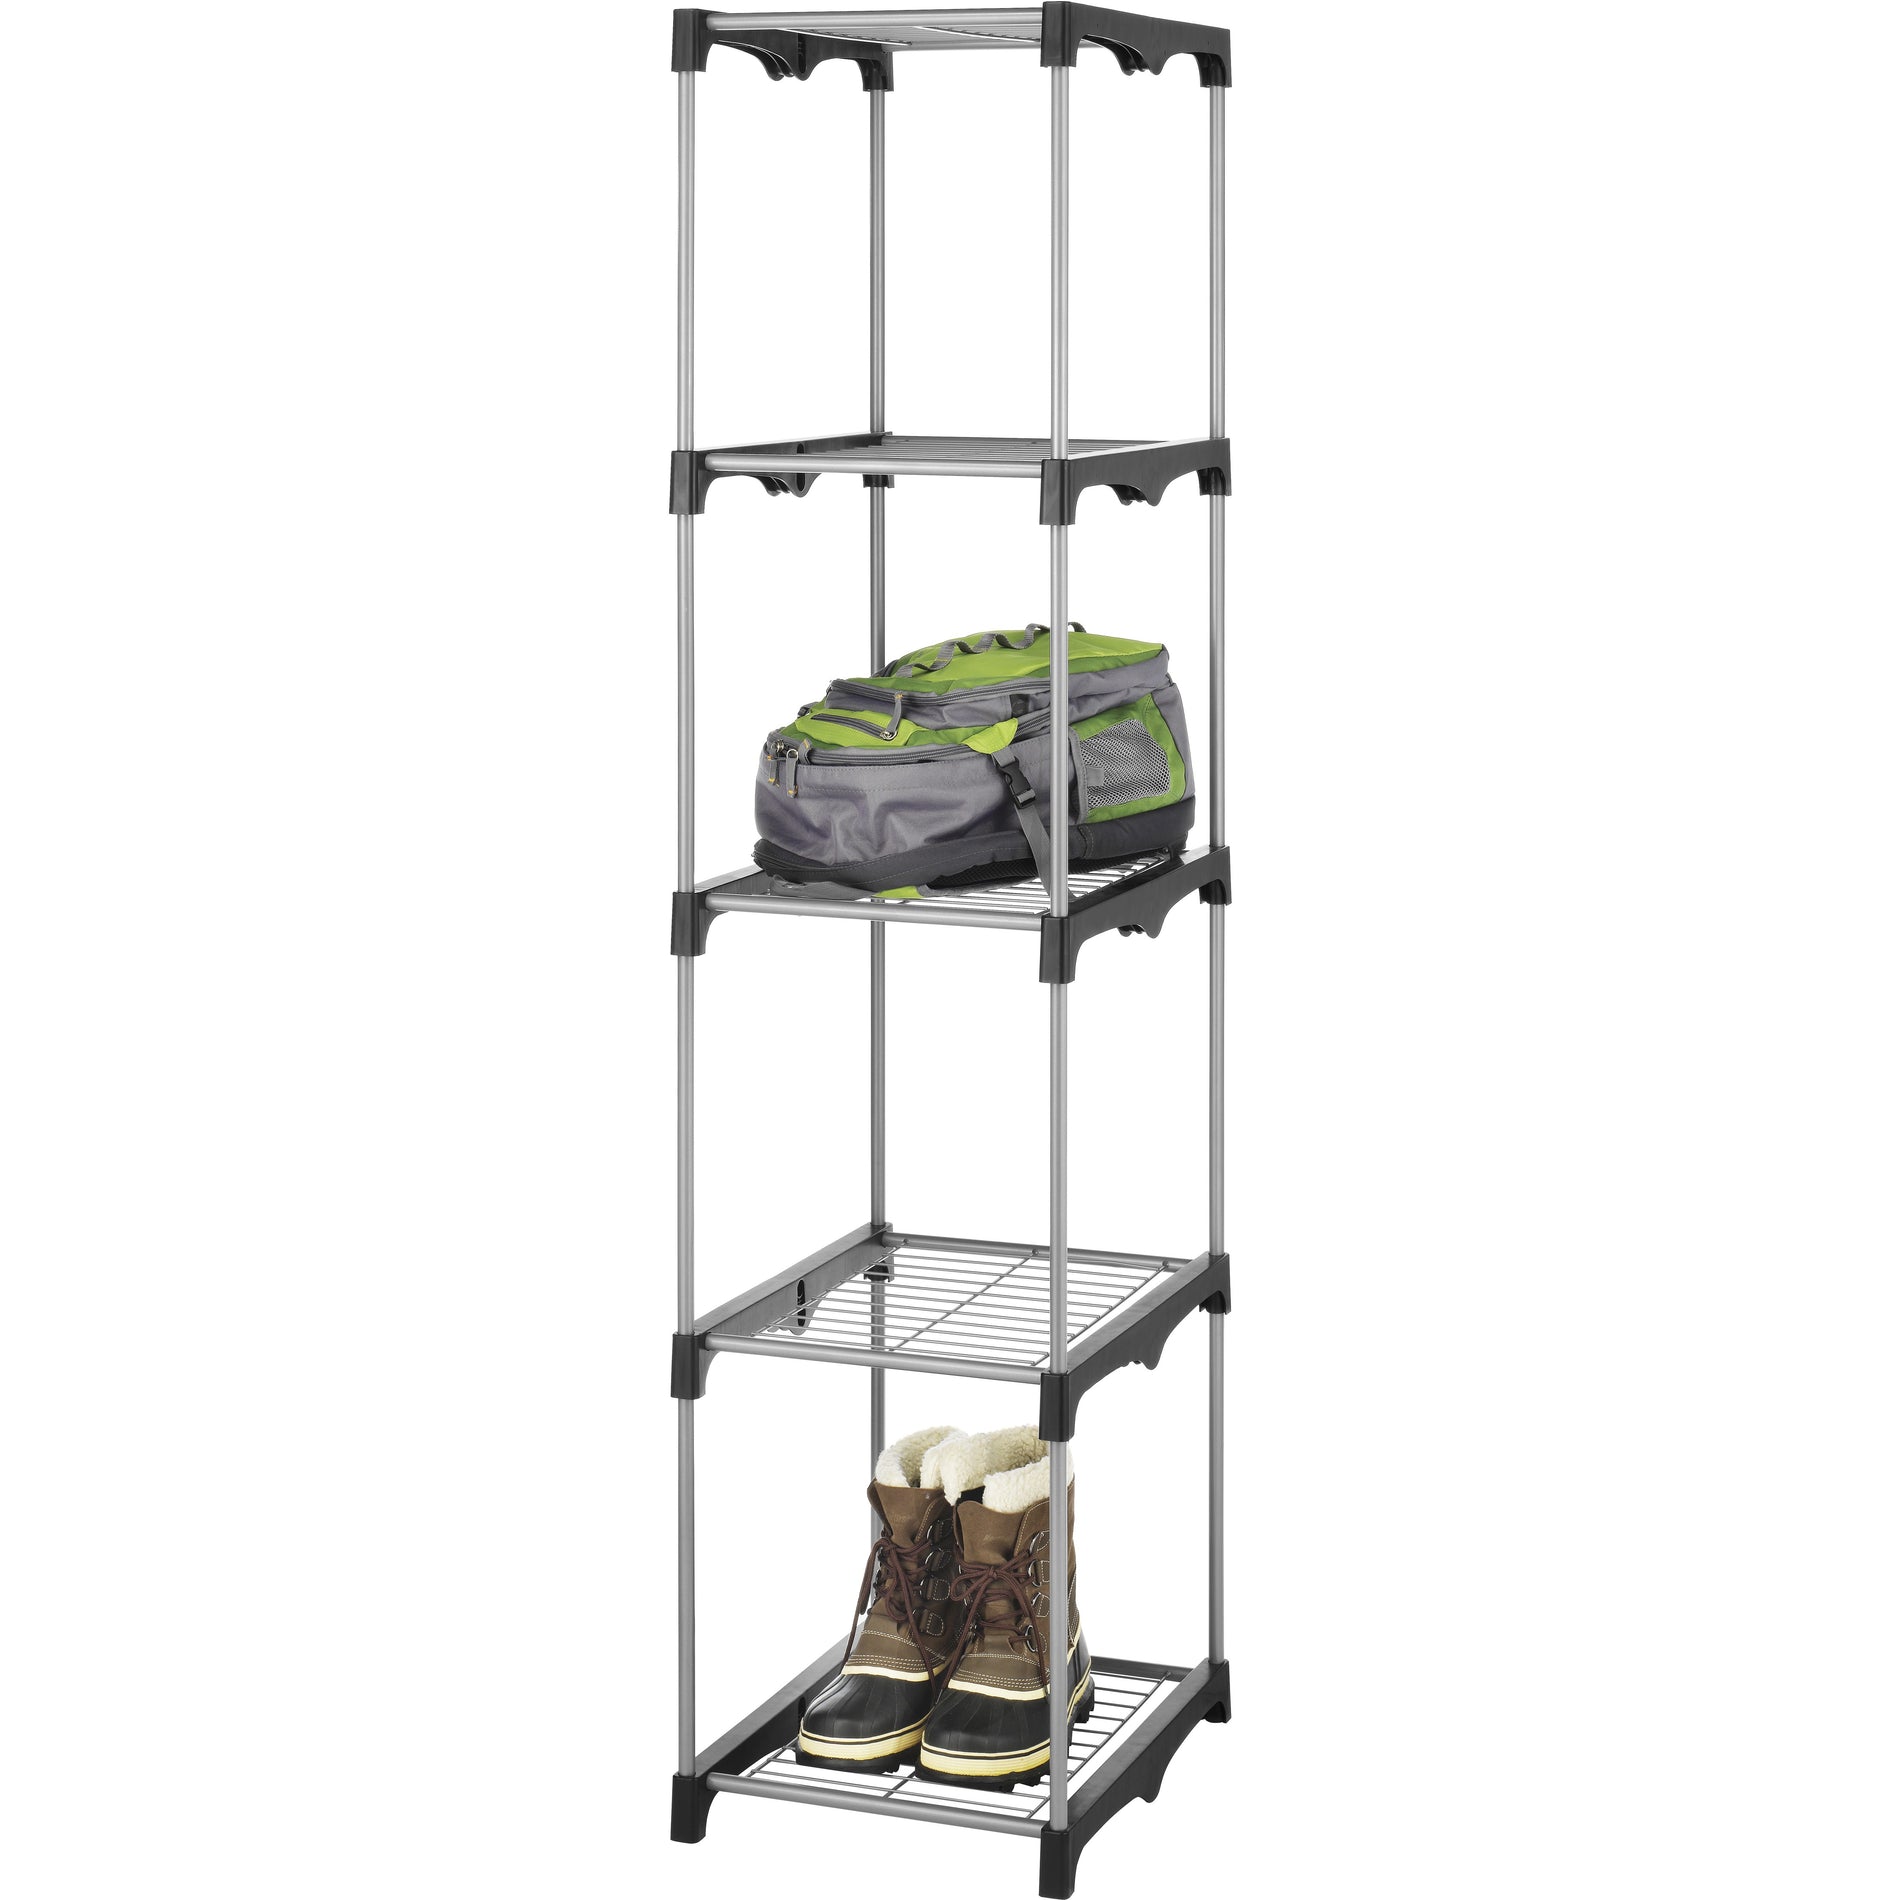 Whitmor 6779-4415 Storage Rack, Closet Organizer Collection, Perfect for storage in the closet, basement, laundry room and more